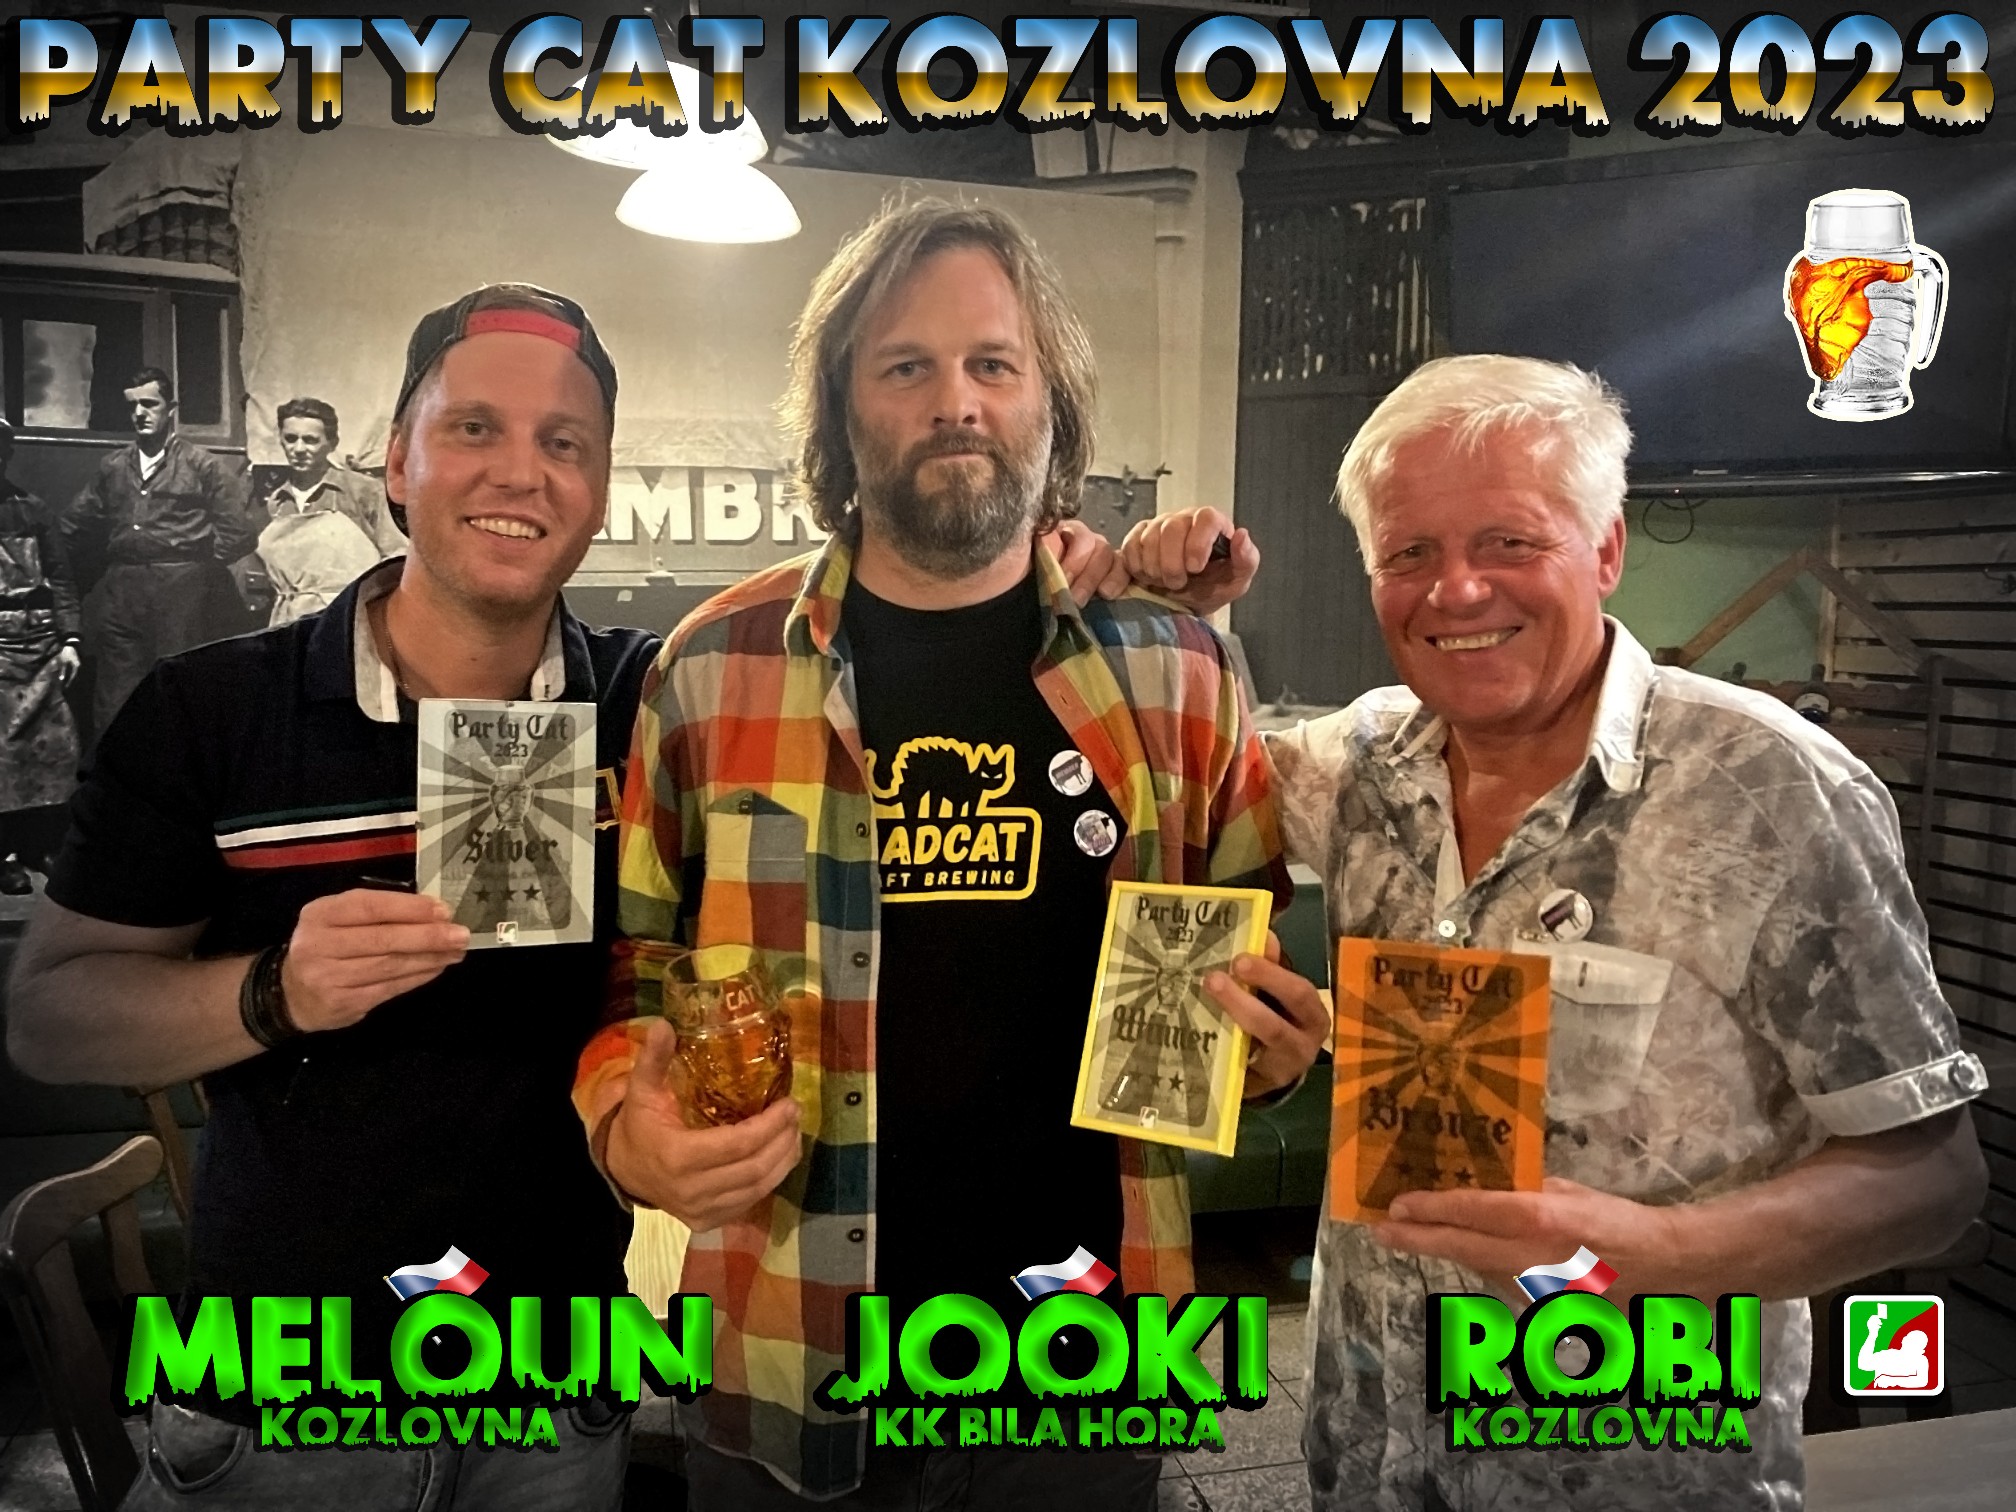 CLASSIC TOUR: Party Cat 2023 winners